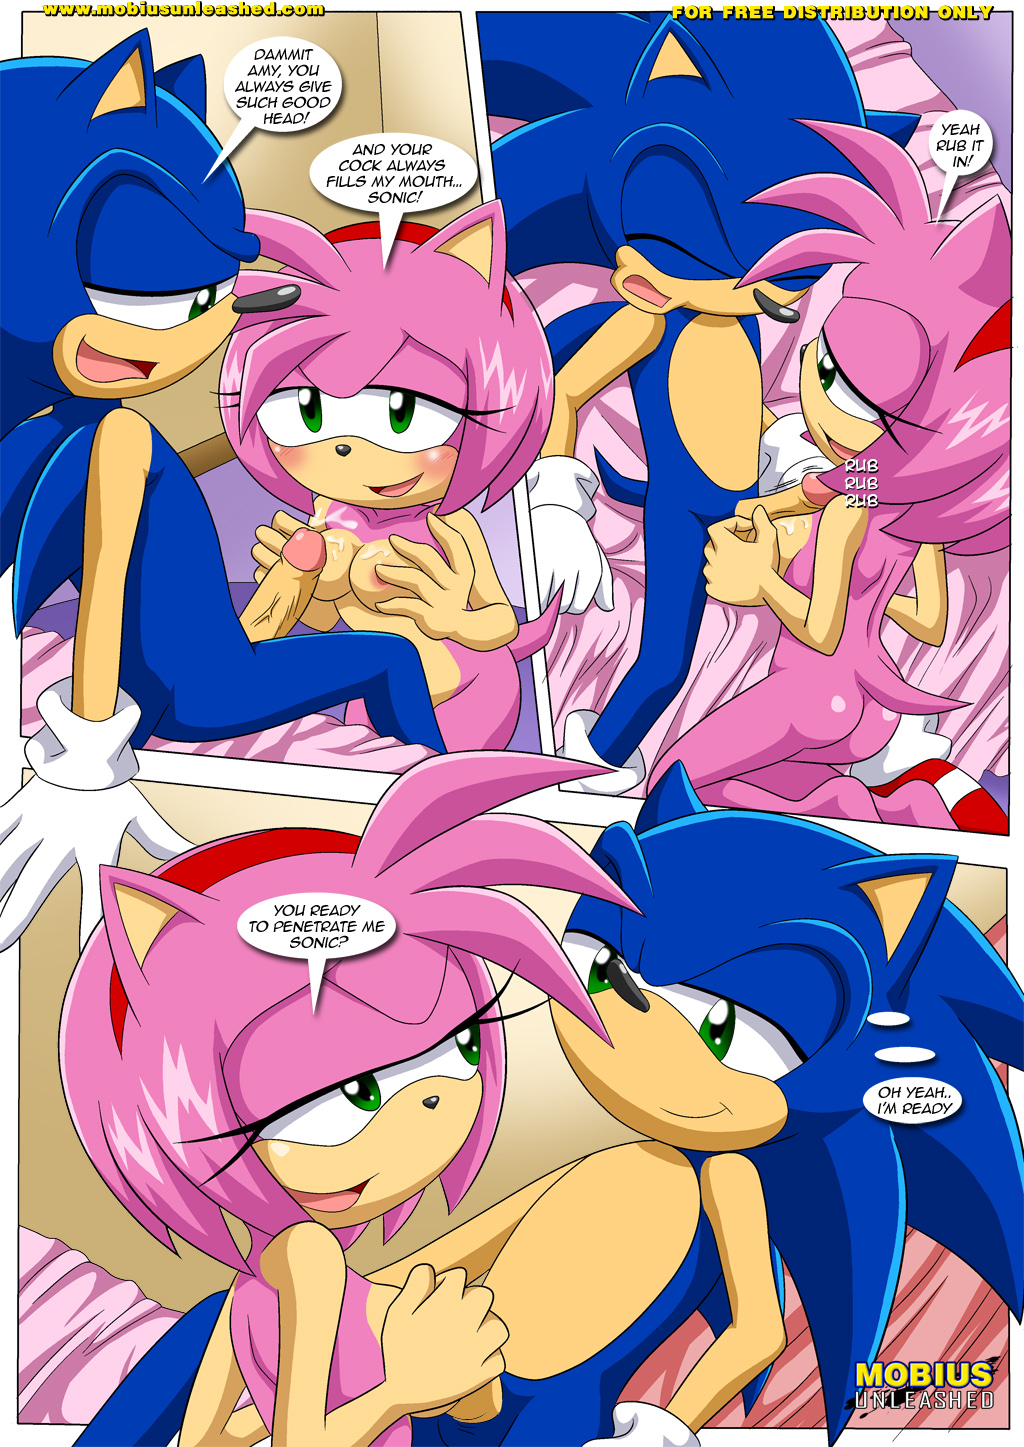 rose amy sonic the hedgehog Mobius unleashed hunting for milfs